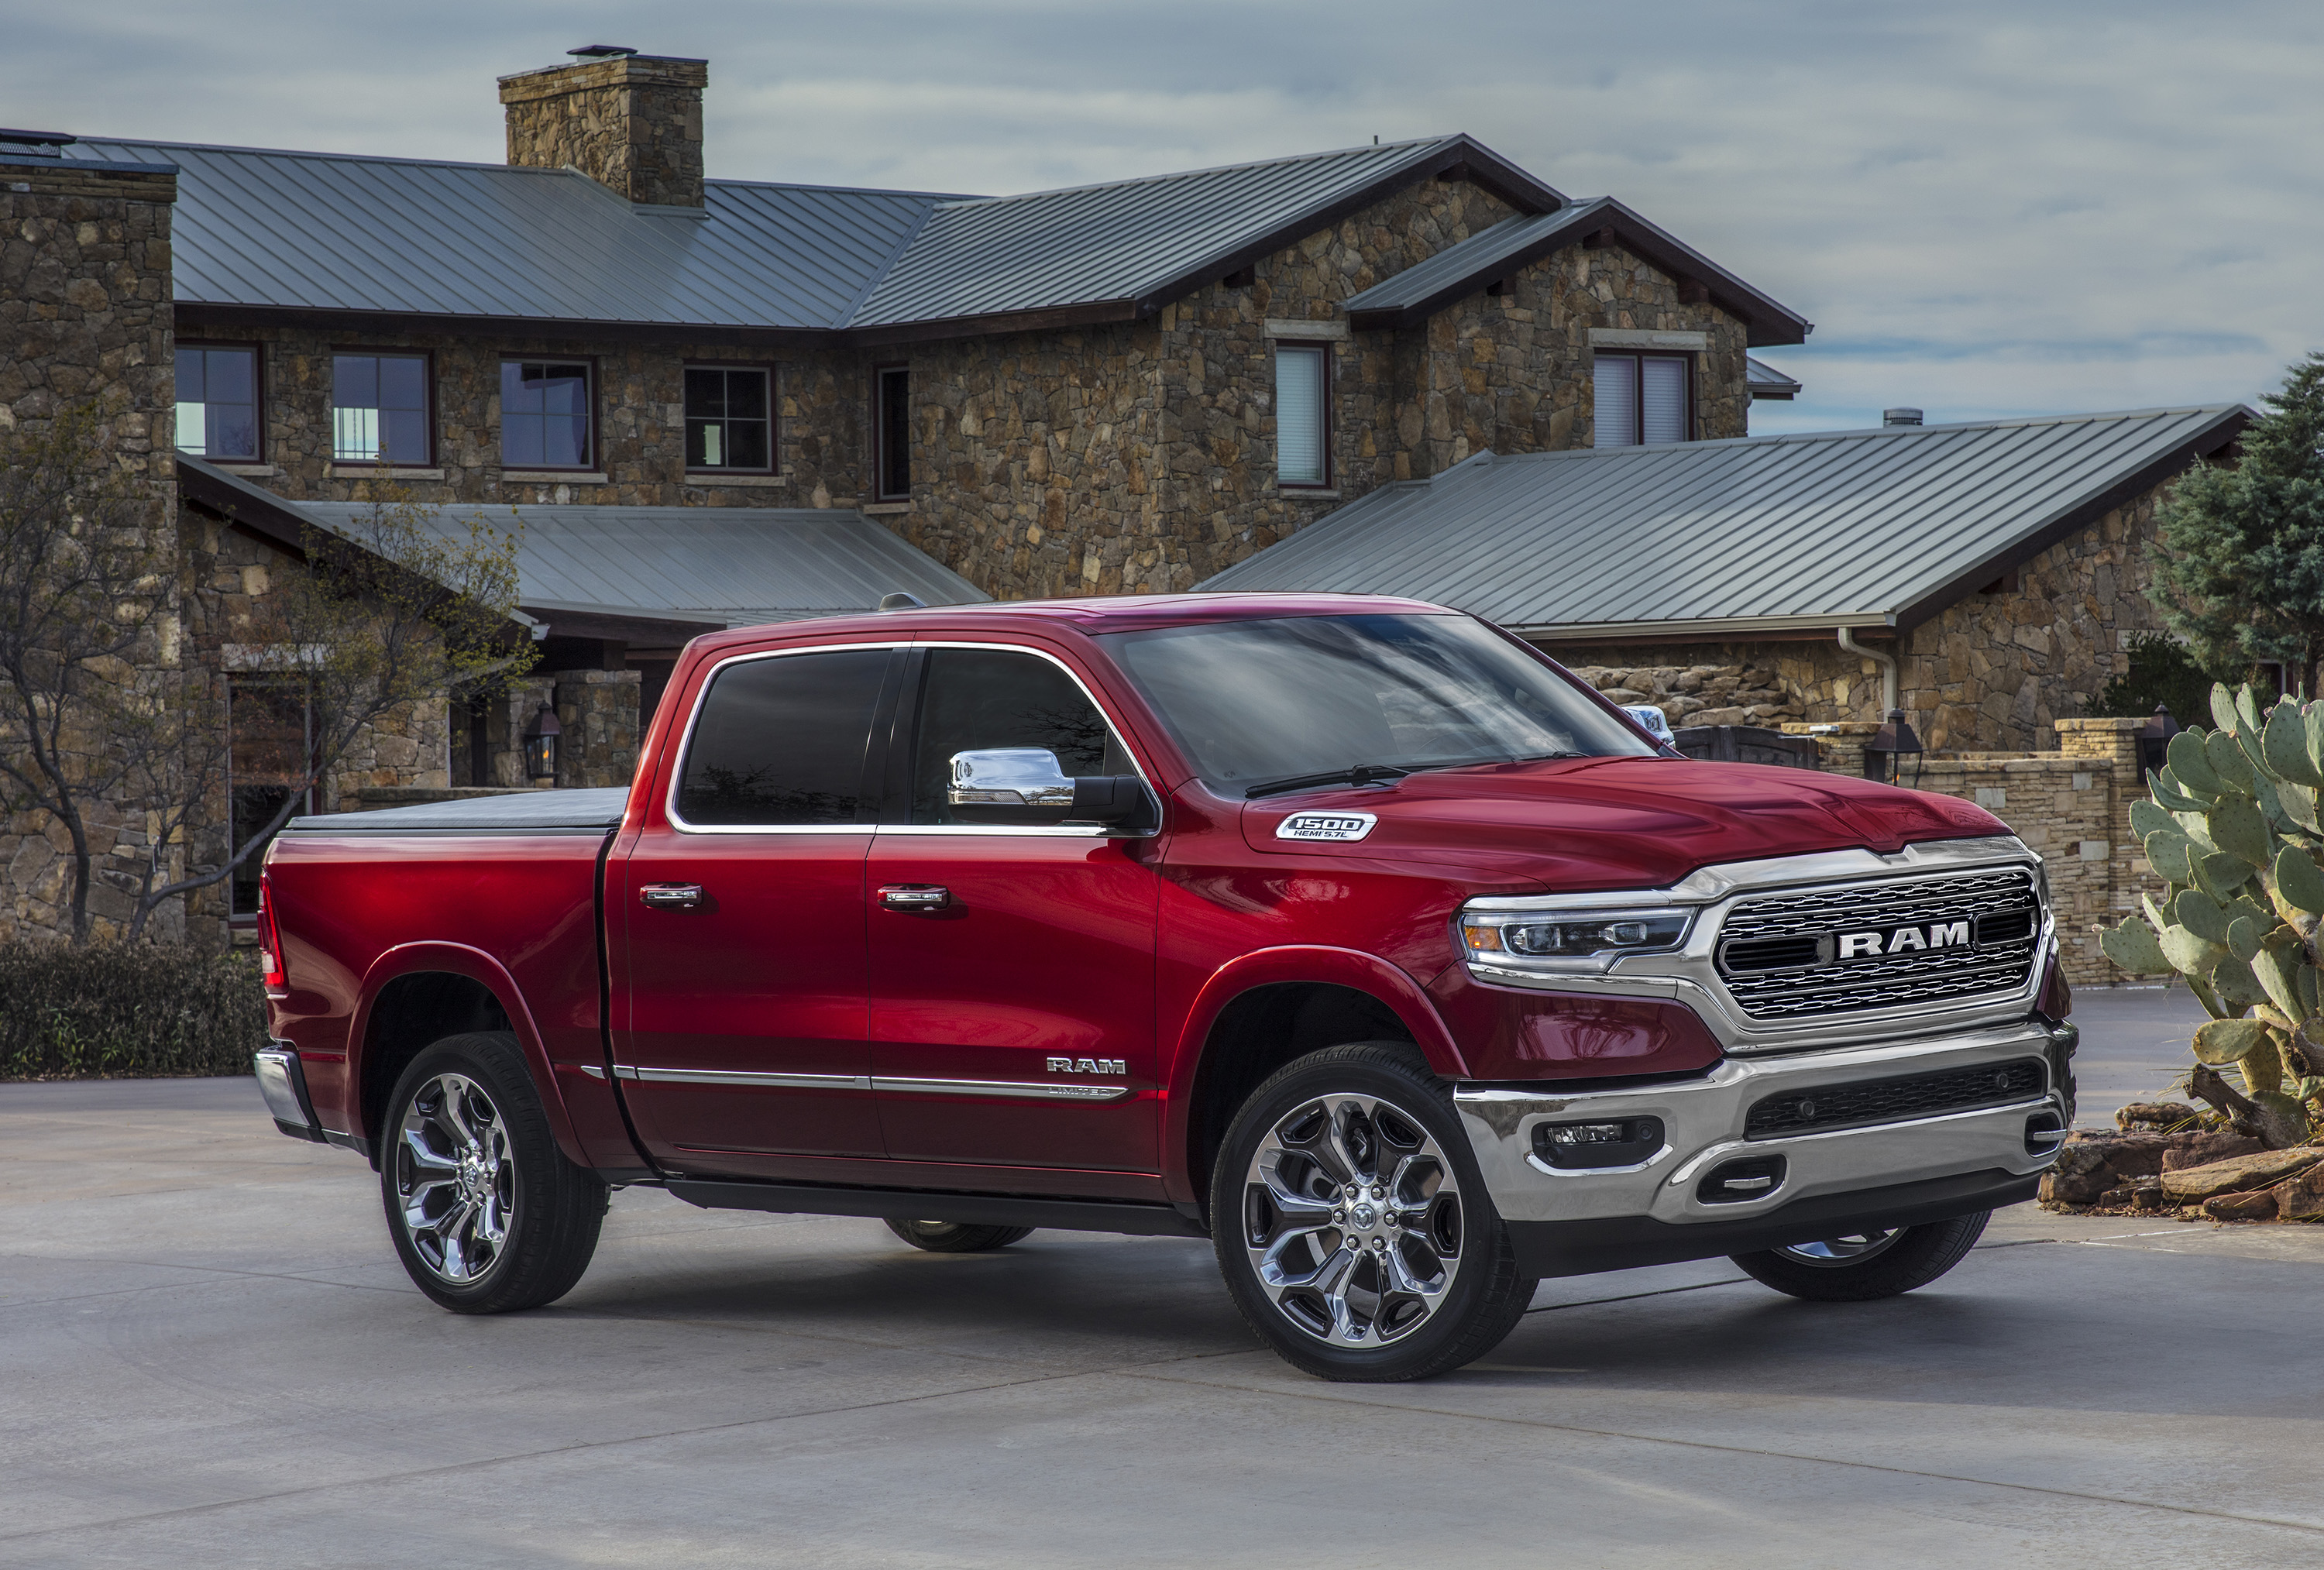 2022 Ram 1500 EcoDiesel is the best truck for towing